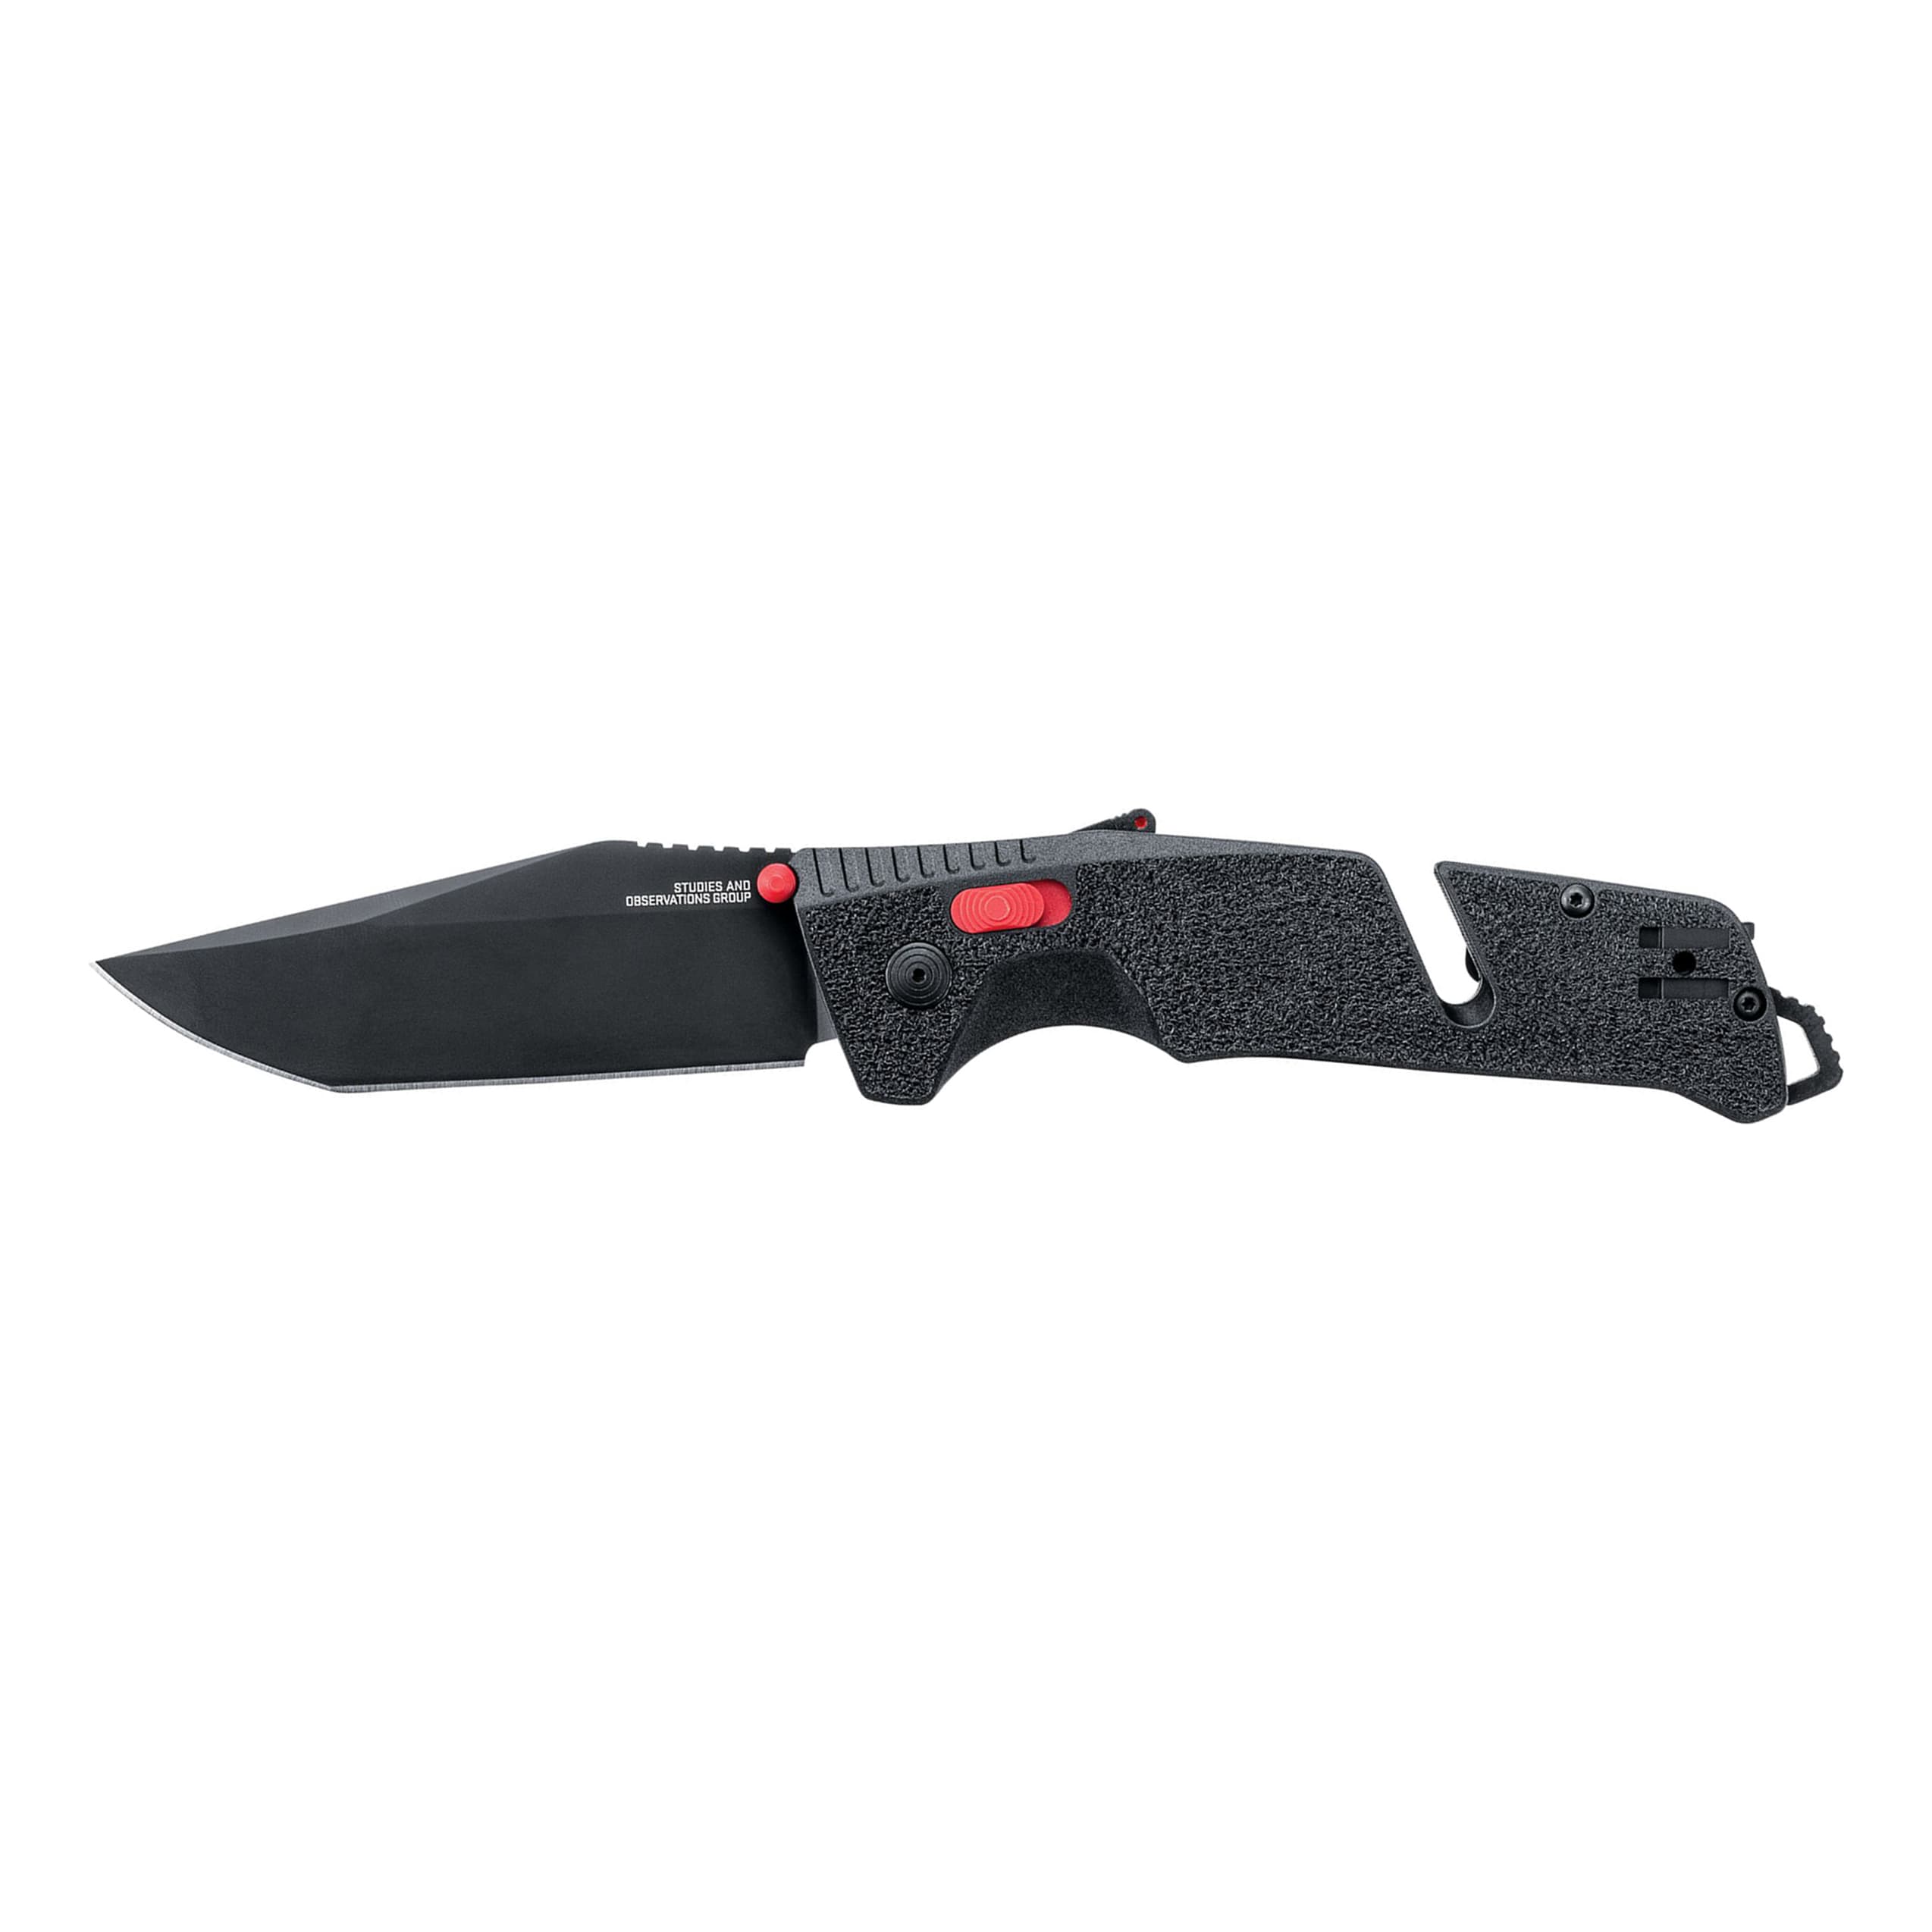 SOG Trident AR Tanto Black Blade Assisted Opening Folding Knife